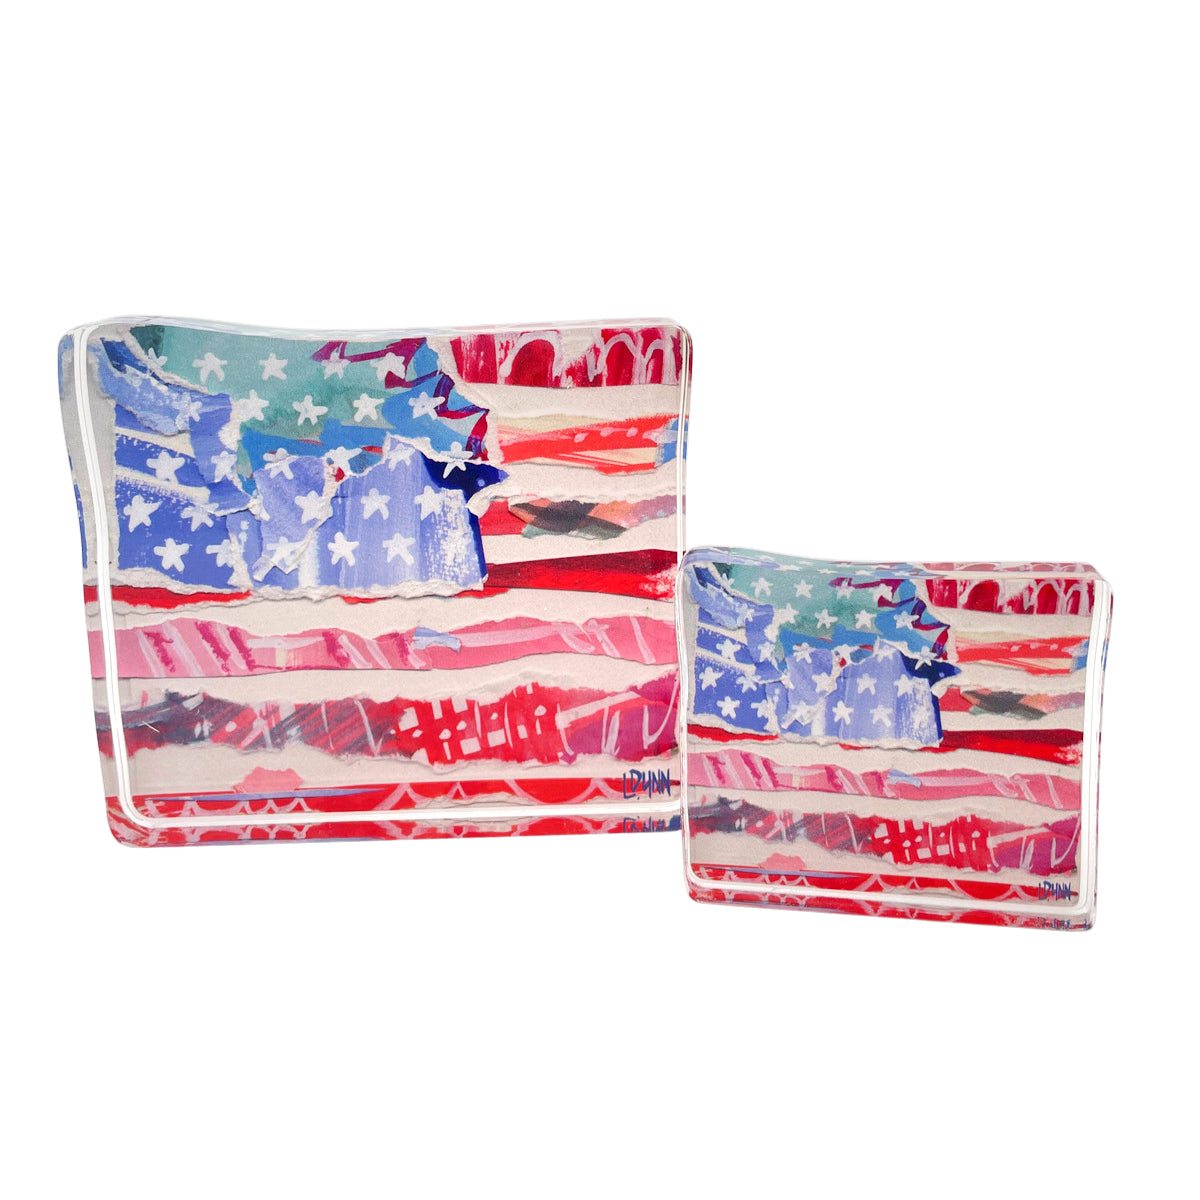 RED FLAG, STARS AND STRIPES ACRYLIC BLOCK